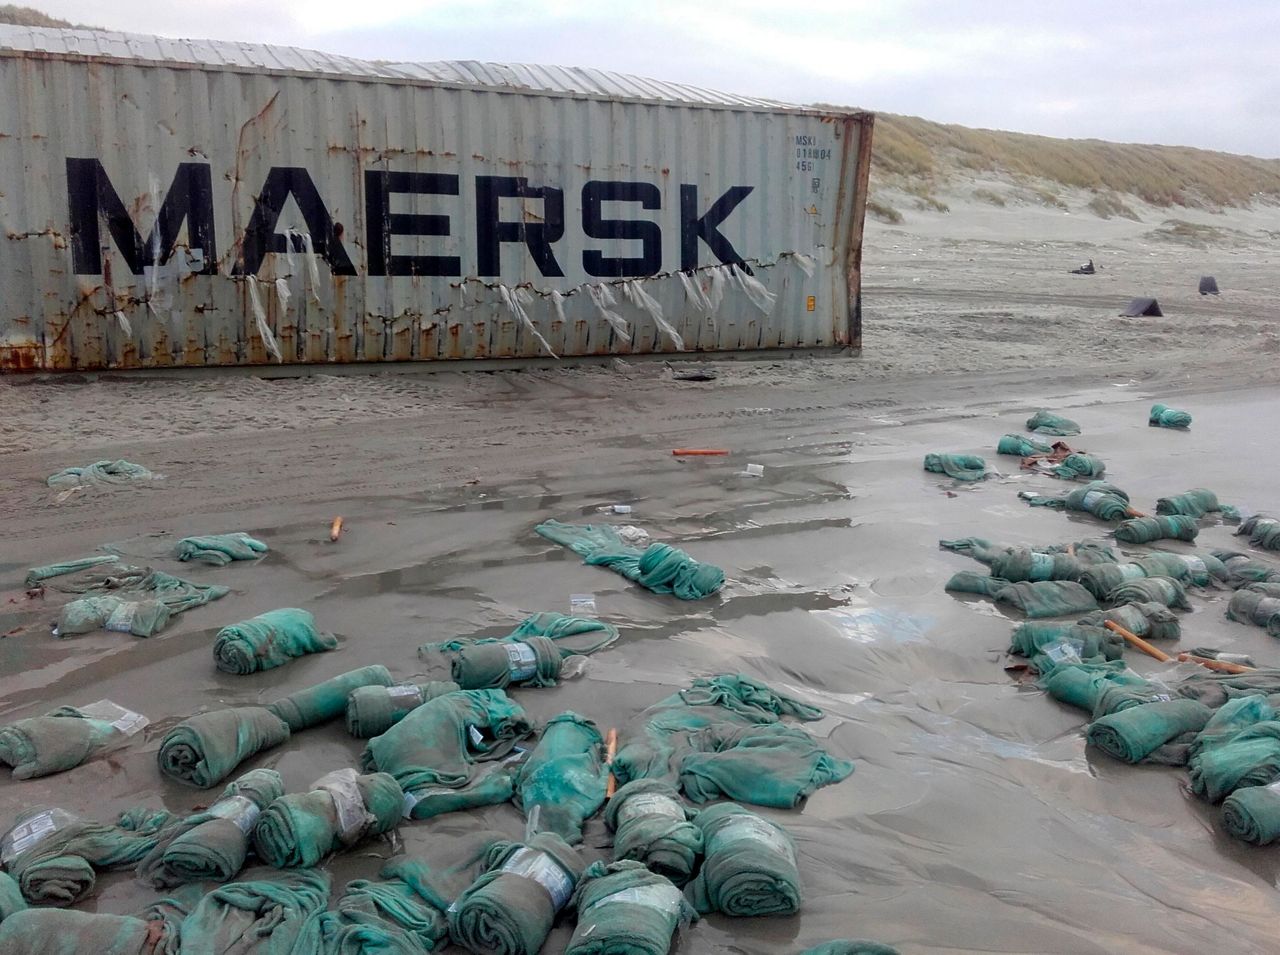 Firm pledges to find shipping containers lost in North Sea